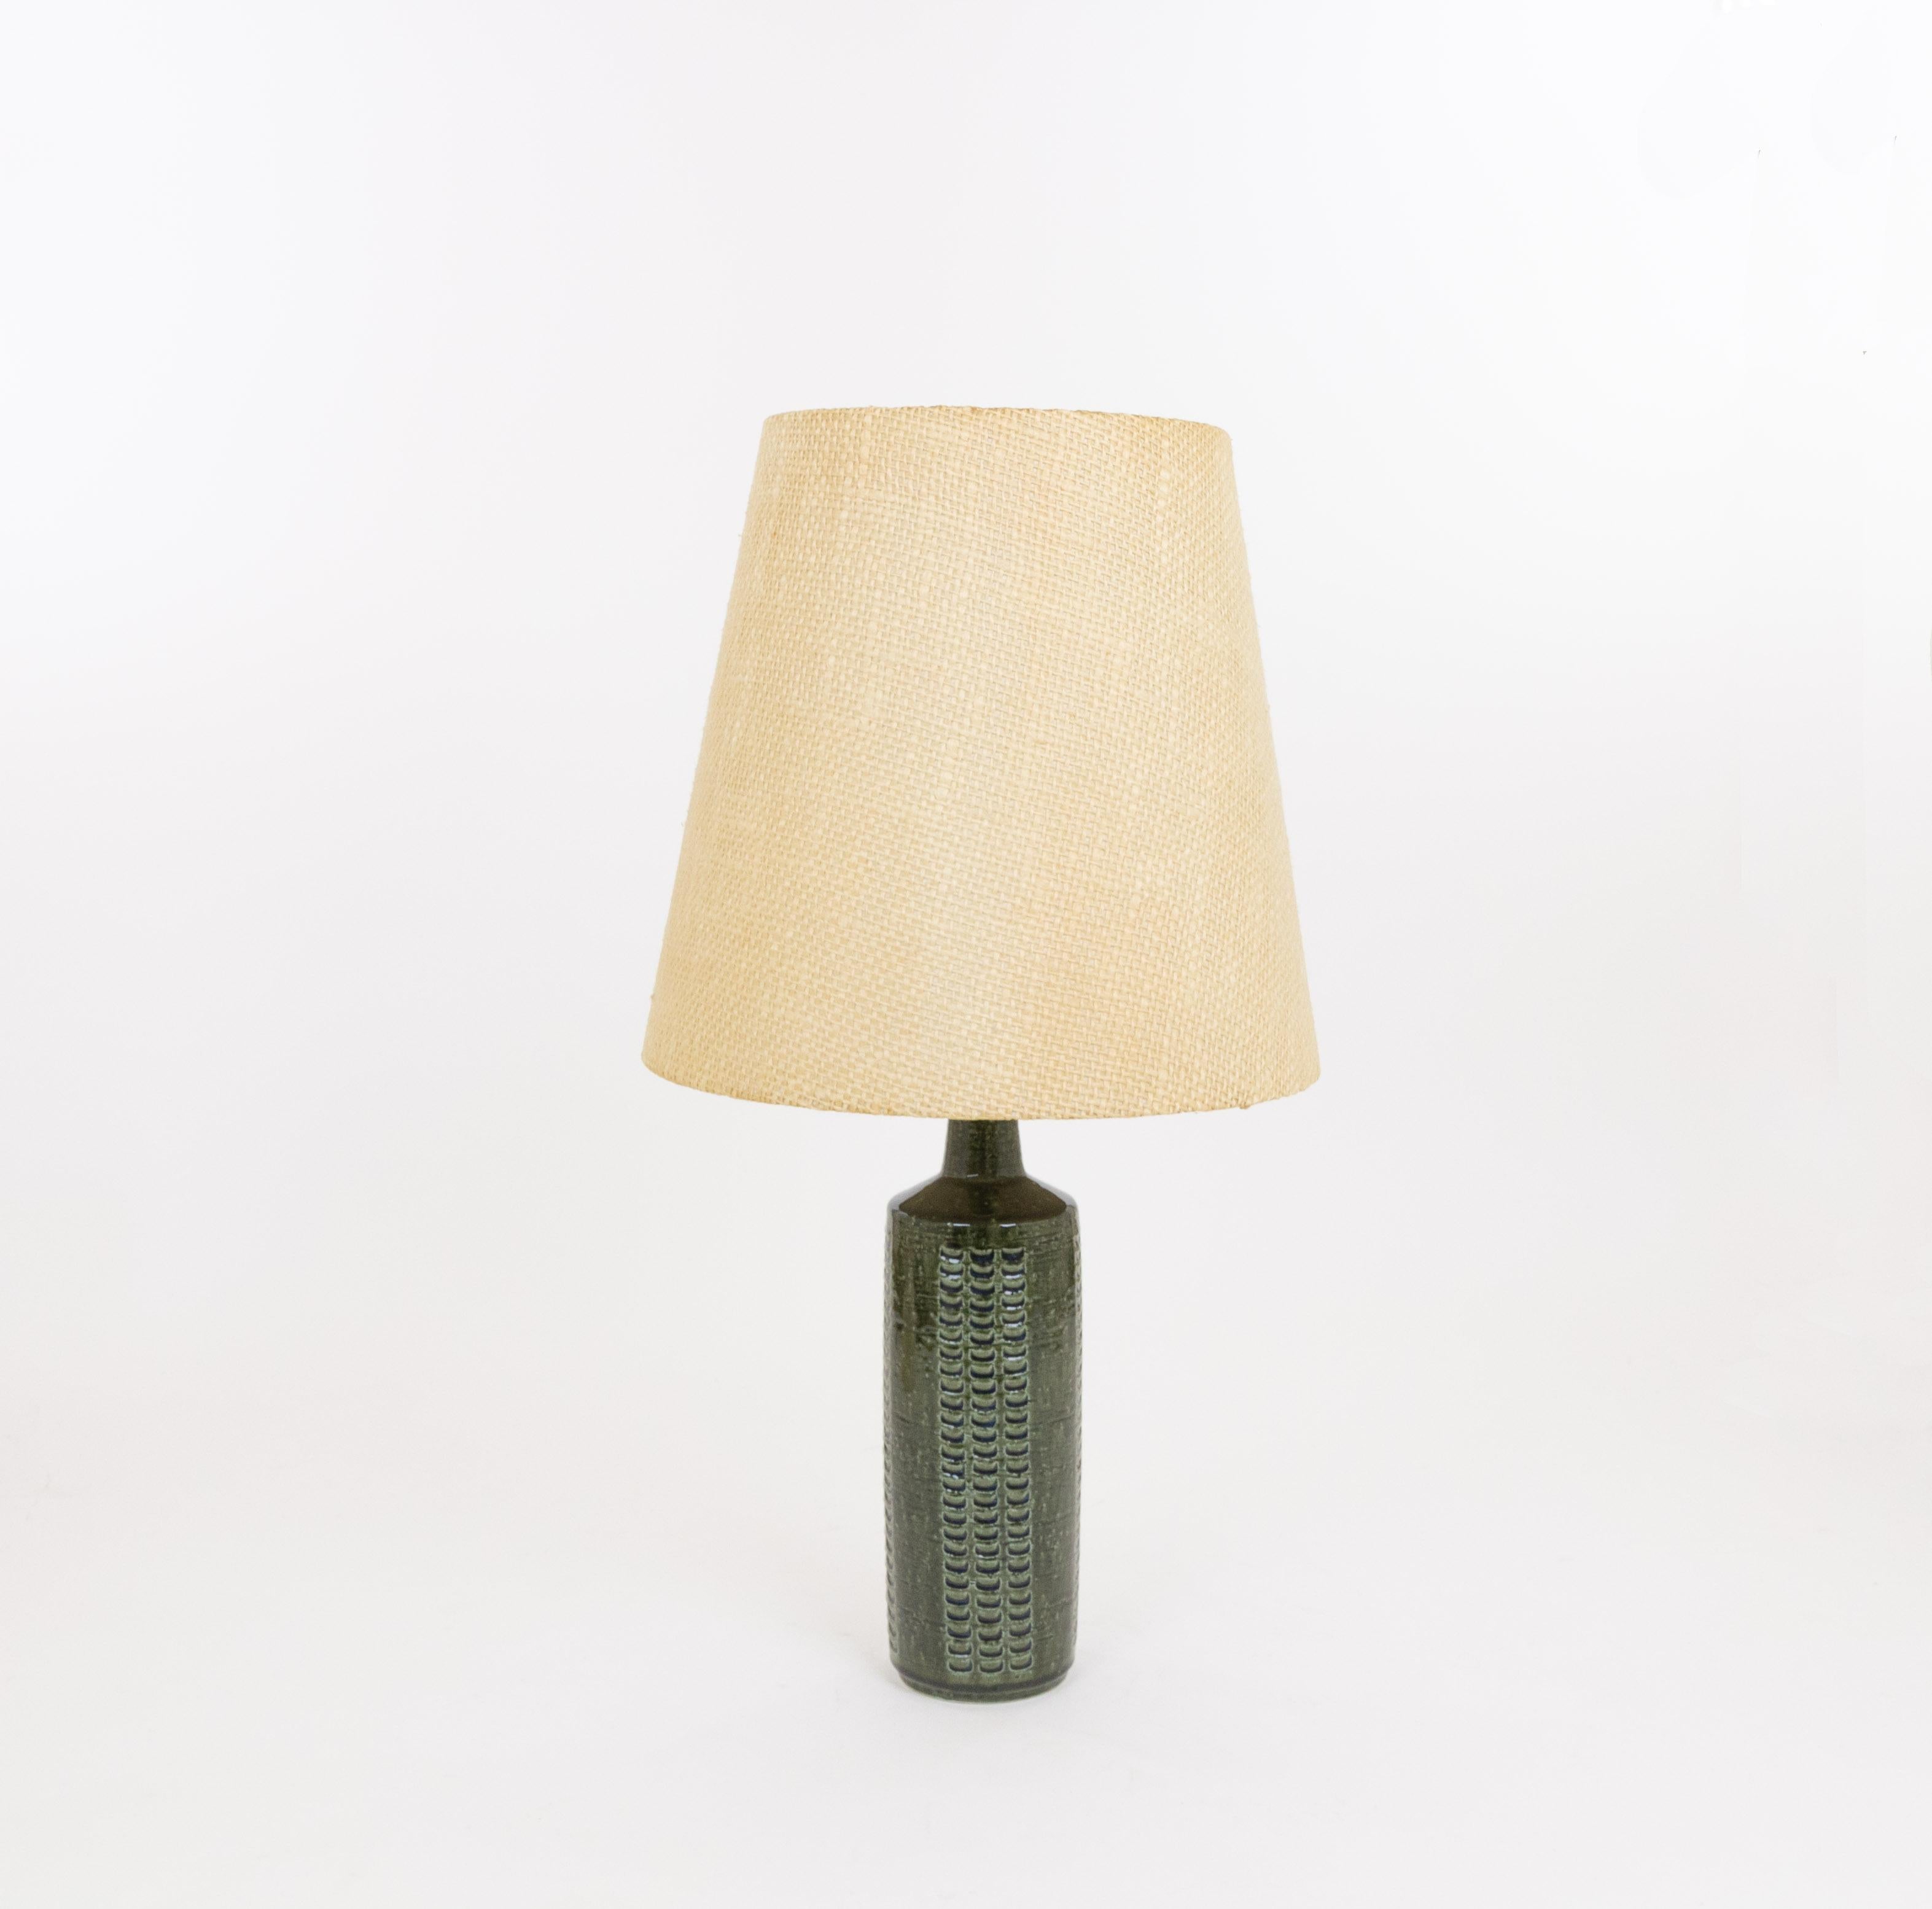 Model DL/27 table lamp made by Annelise and Per Linnemann-Schmidt for Palshus in the 1960s. The colour of the handmade decorated base is Bottle Green, with traces of midnight blue. It has impressed patterns.

The lamp comes with its original